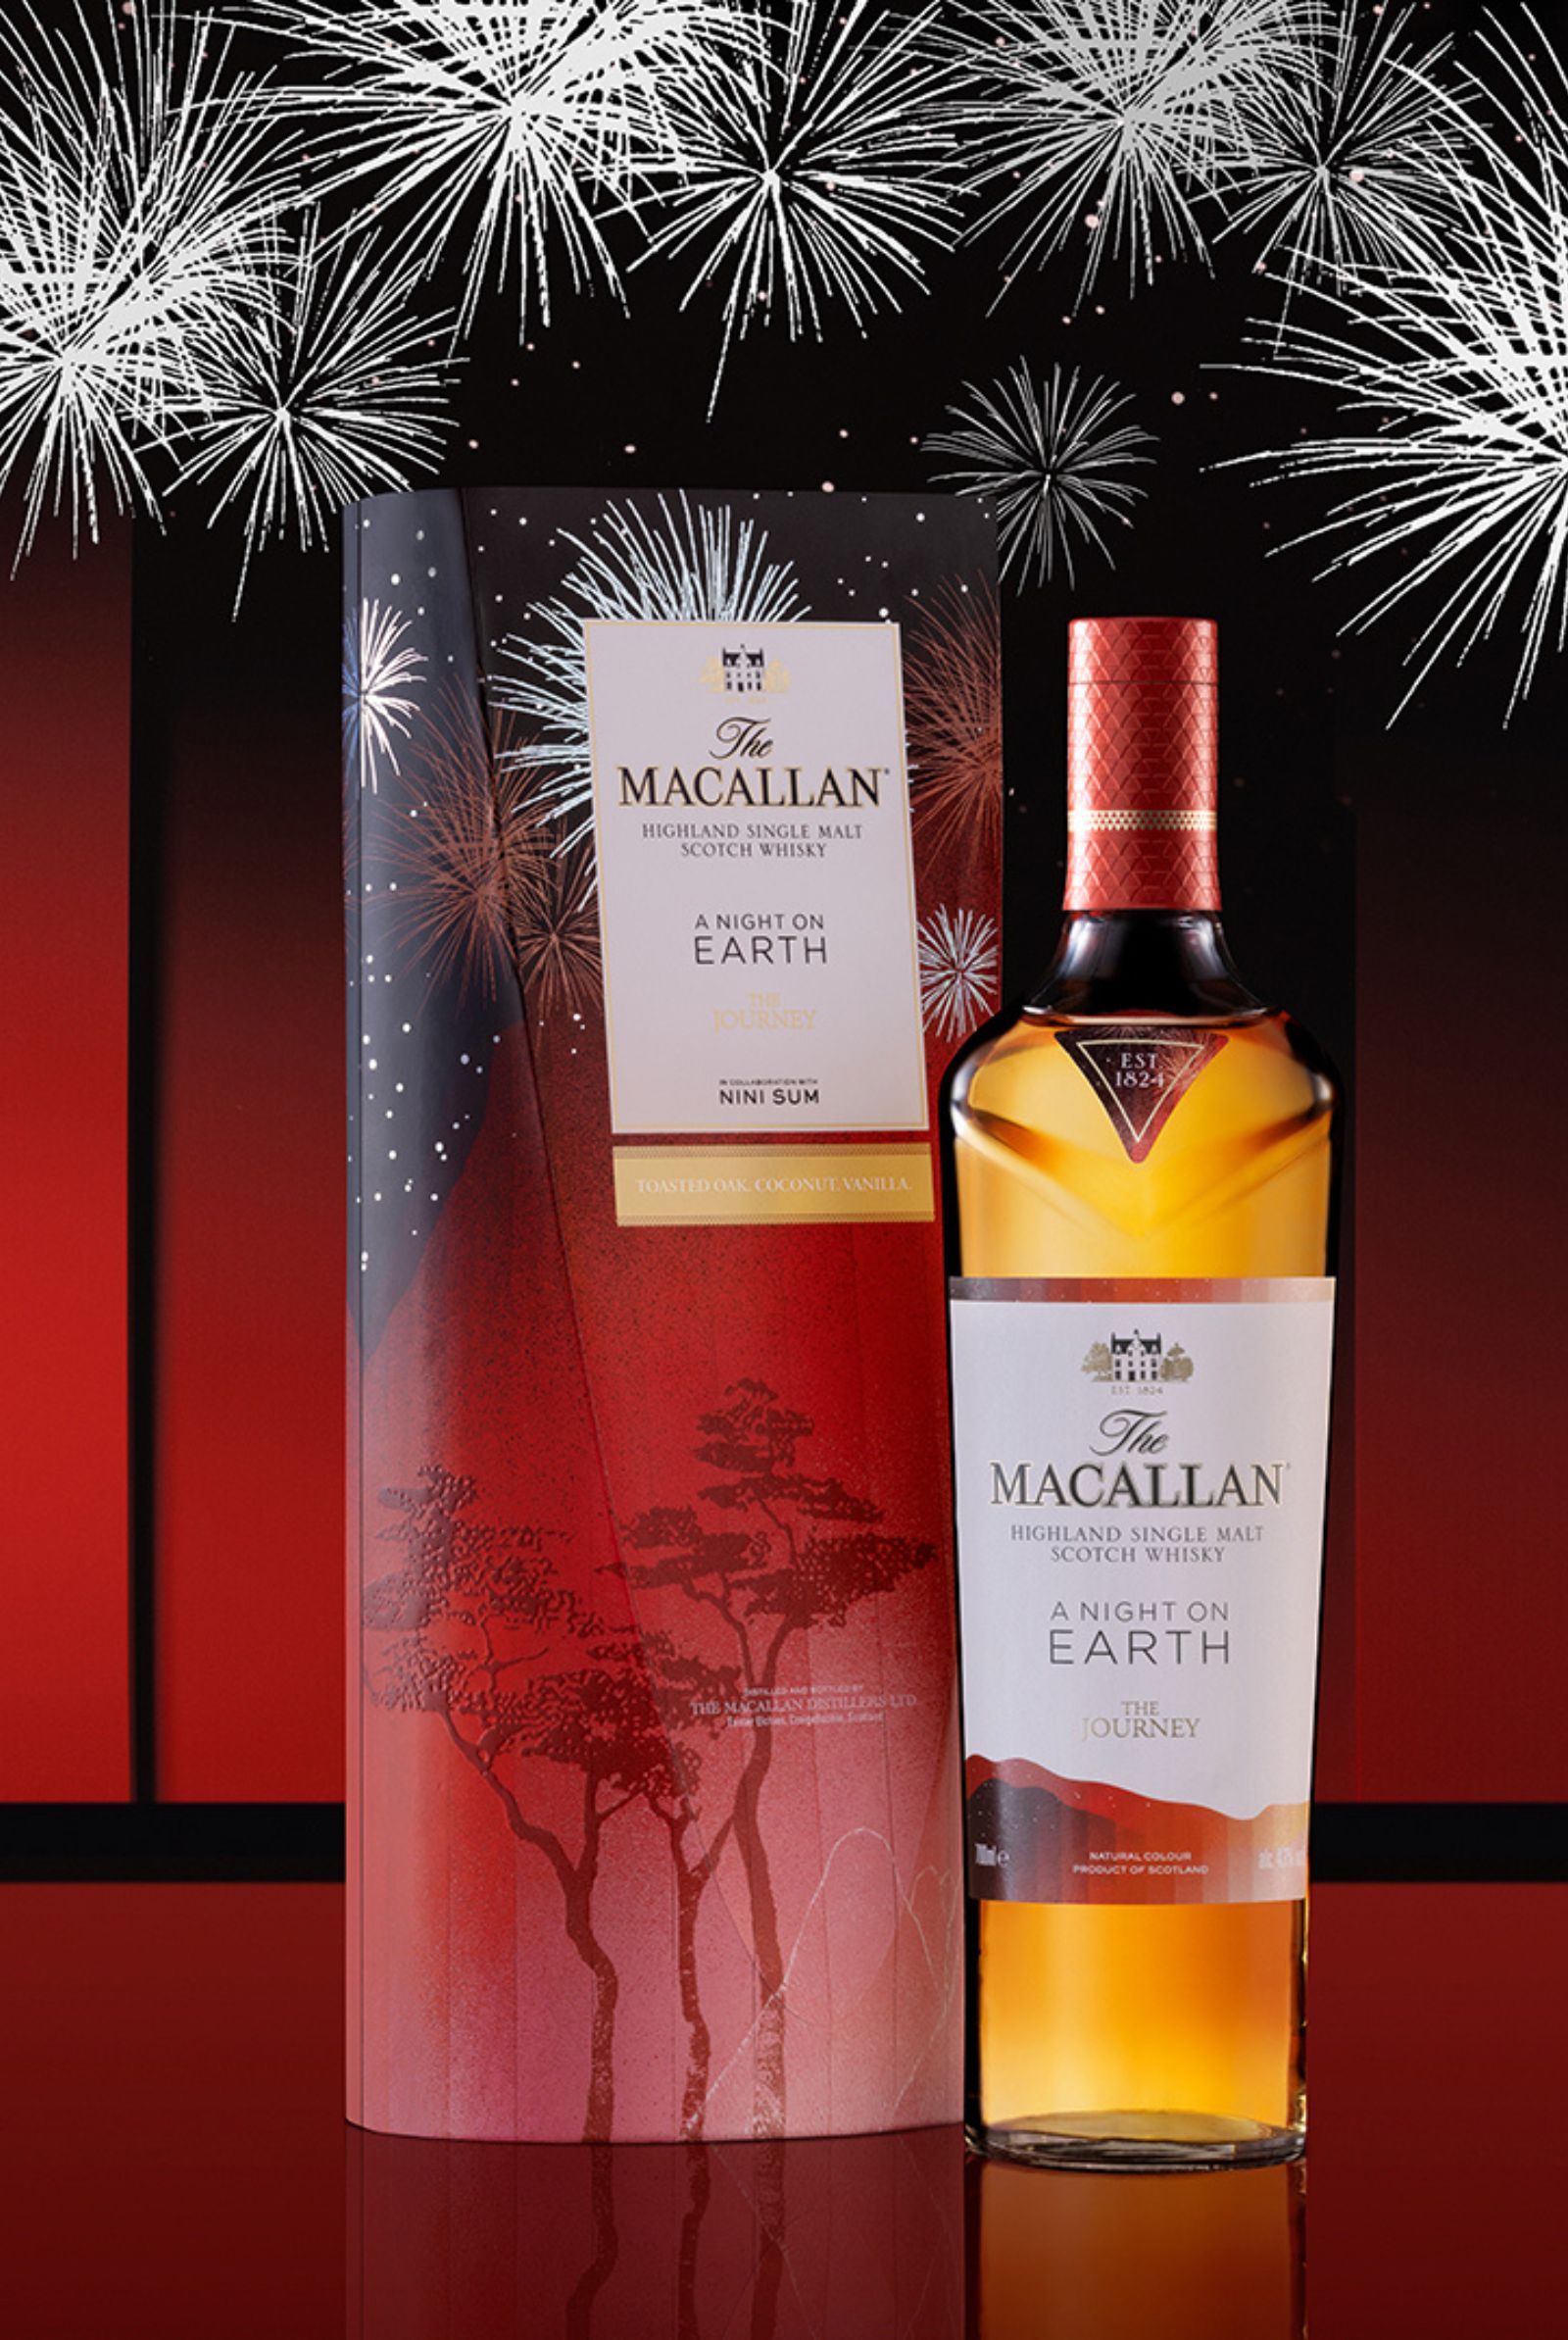 The Macallan A Night on Earth – The Journey